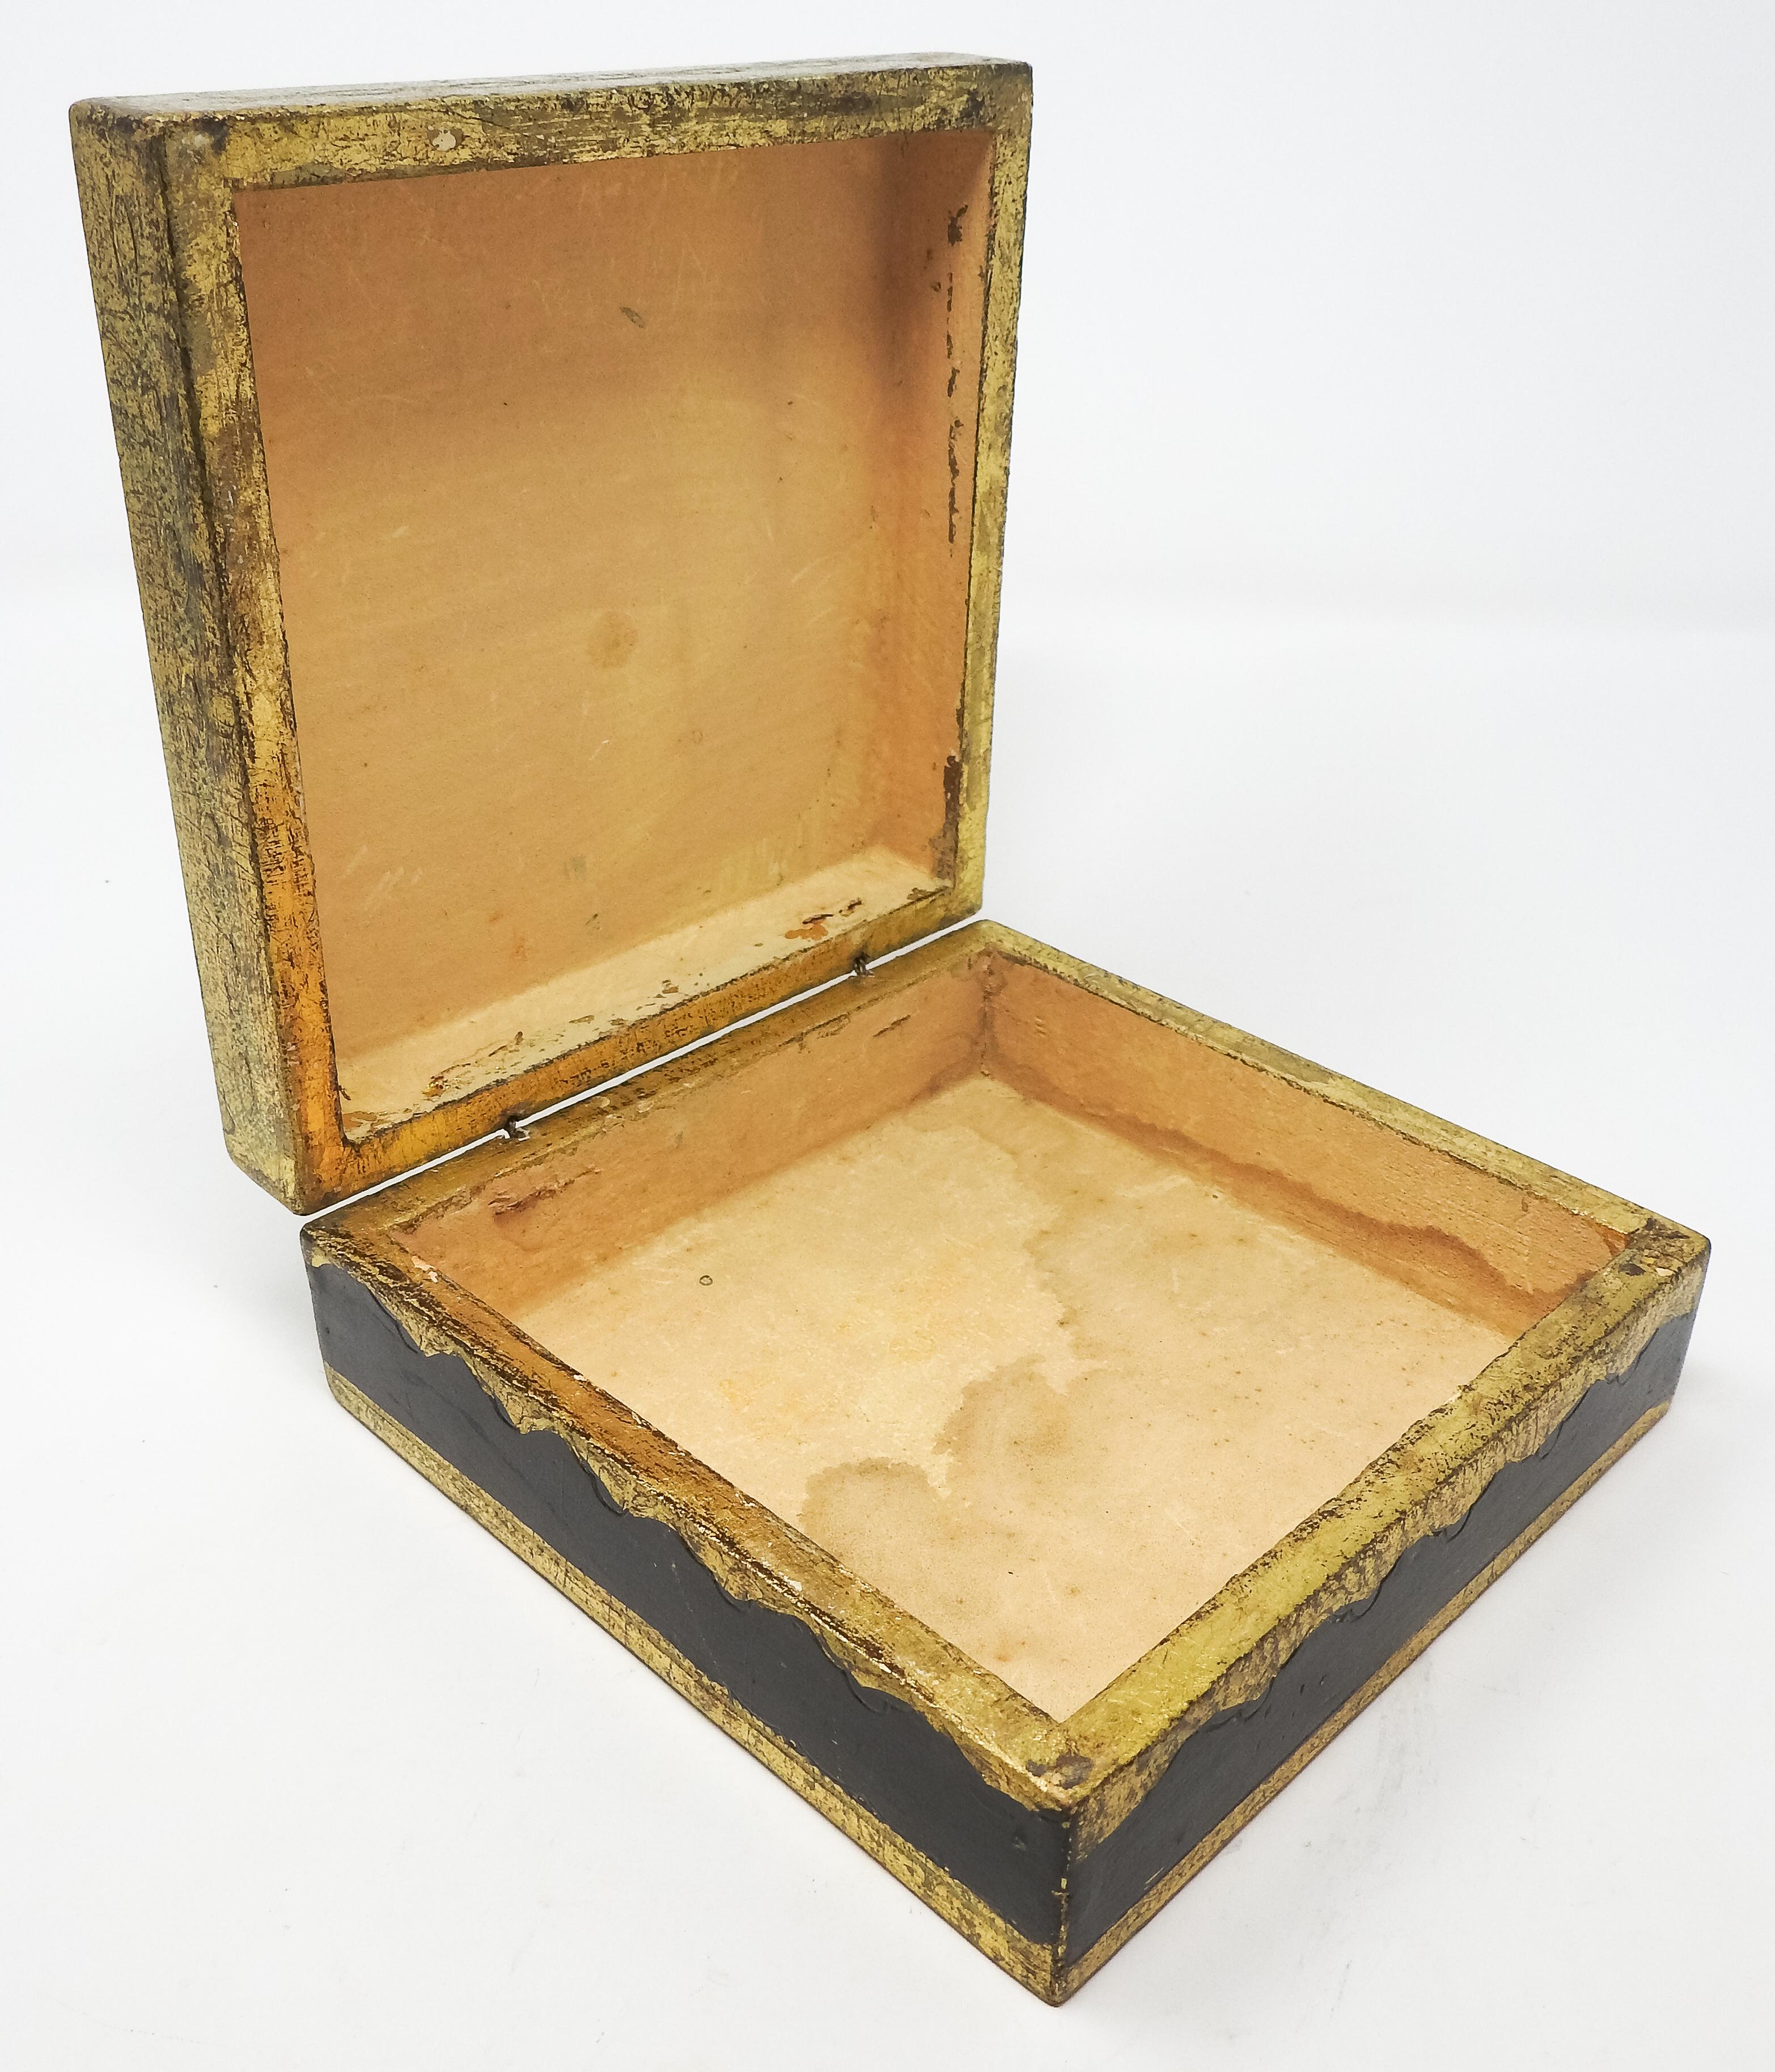 Black and Gold Gilded Florentine Box In Fair Condition For Sale In Cookeville, TN